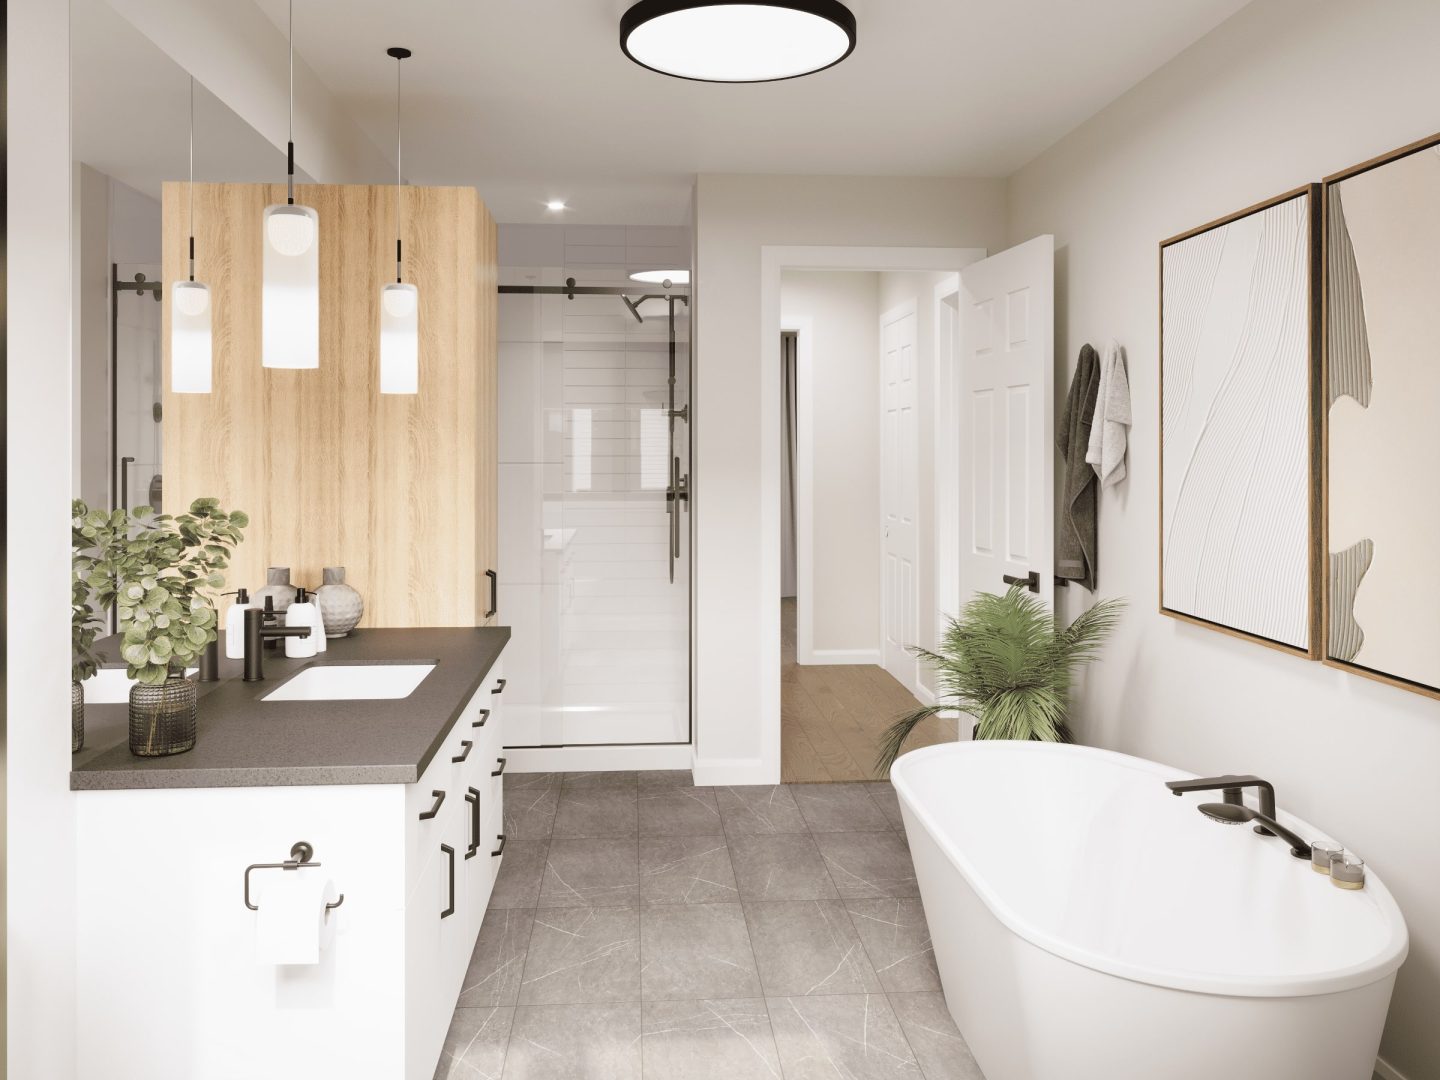 The Onesto model is a single-story townhouse in contemporary style. View of the bathroom.